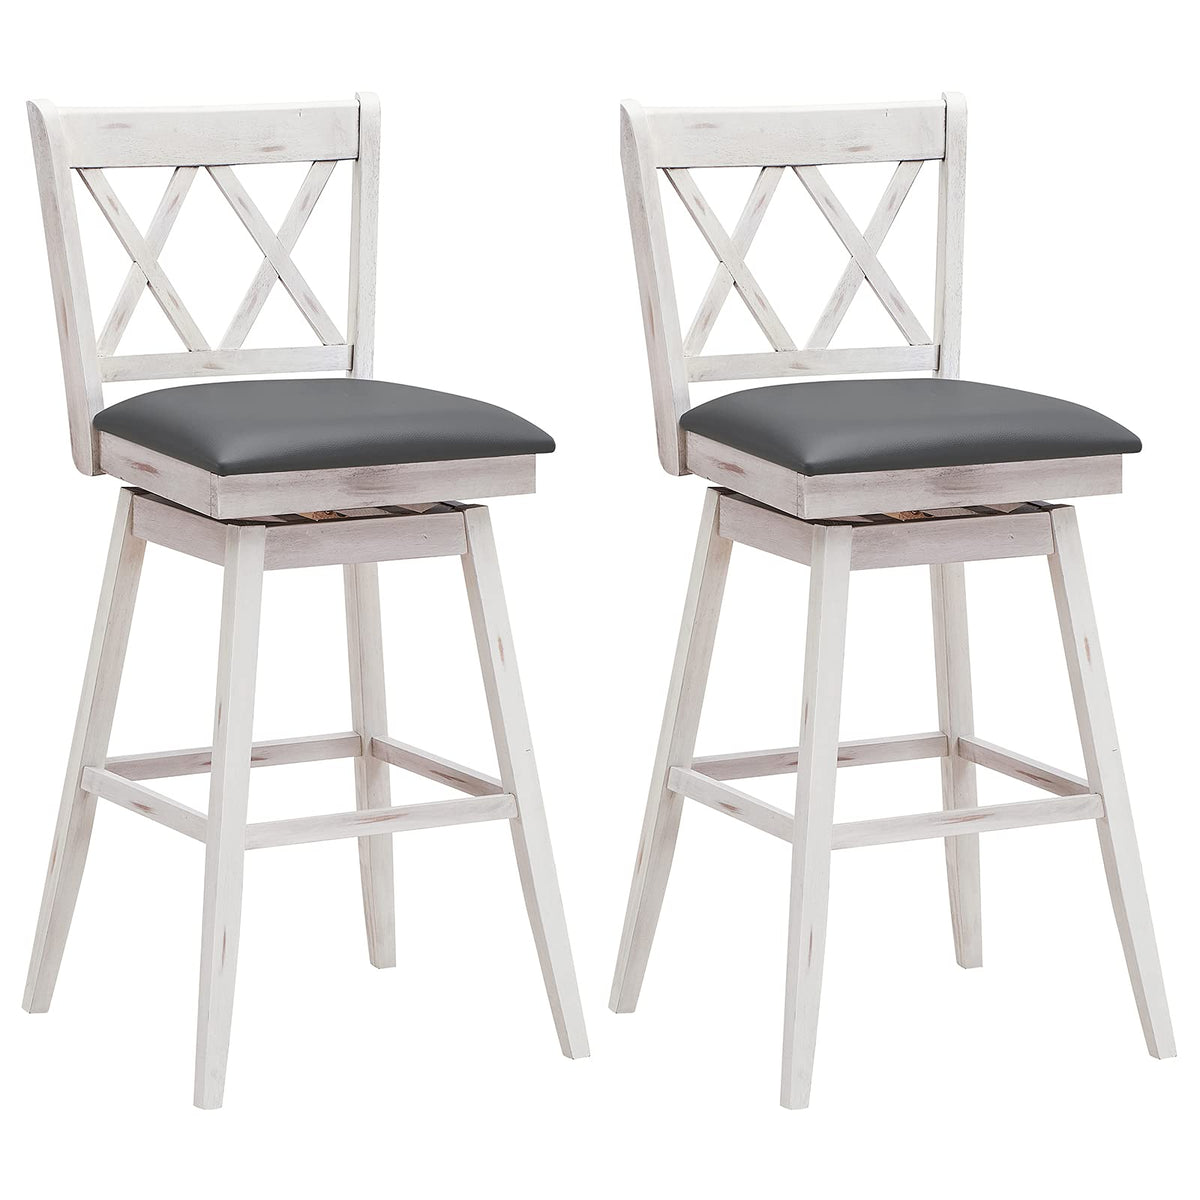 Giantex Set of 2 Bar Stool, Counter Height Barstool W/Foot Rest Upholstered Cushion